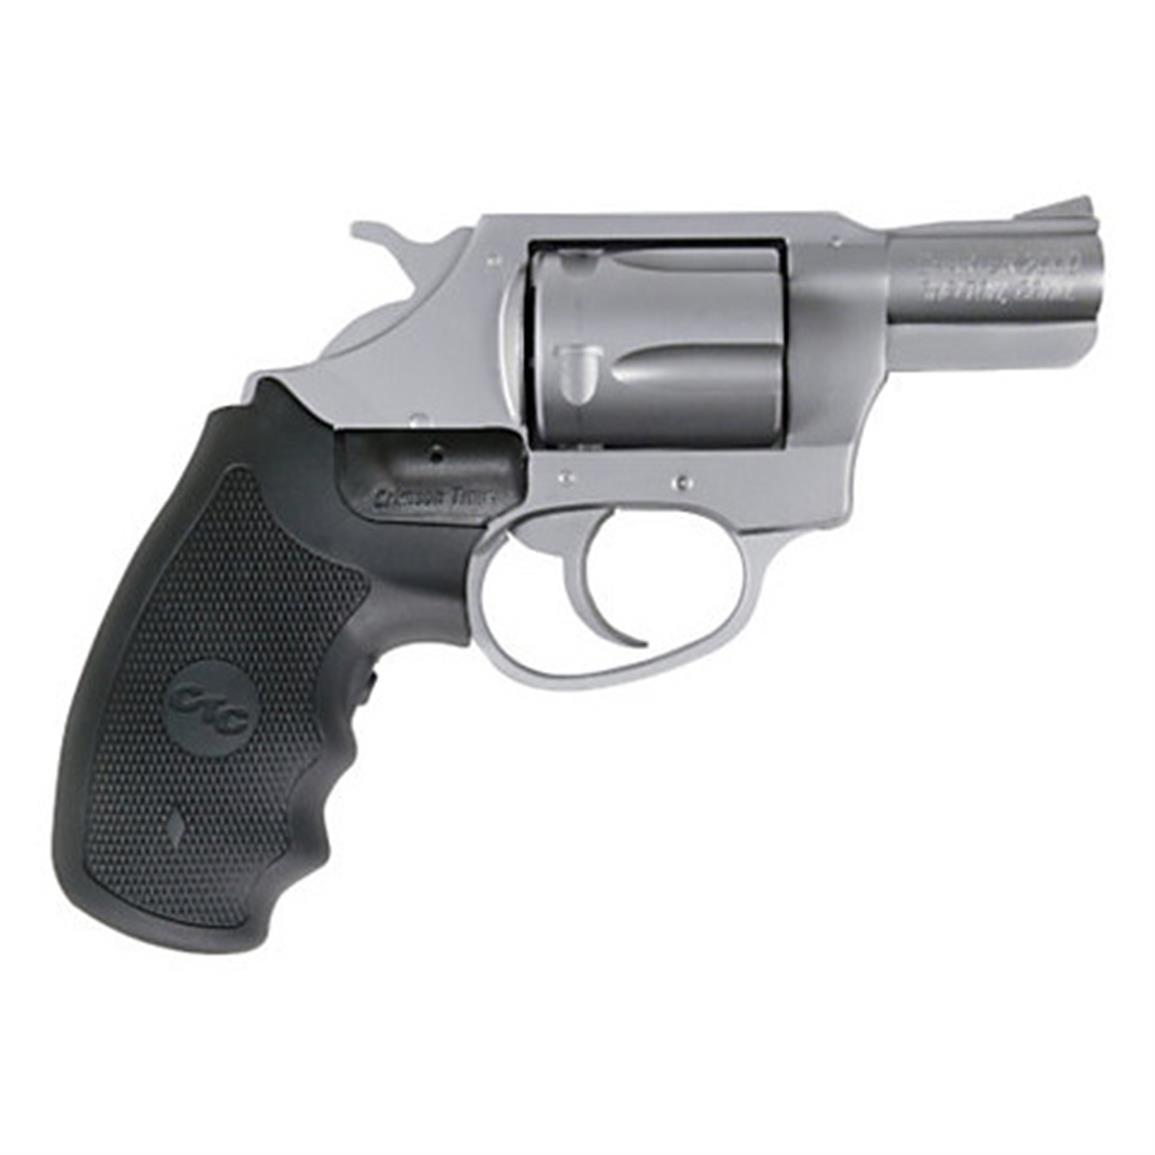 Charter Arms Undercover Lite, Revolver, .38 Special, 53870, 678958538700